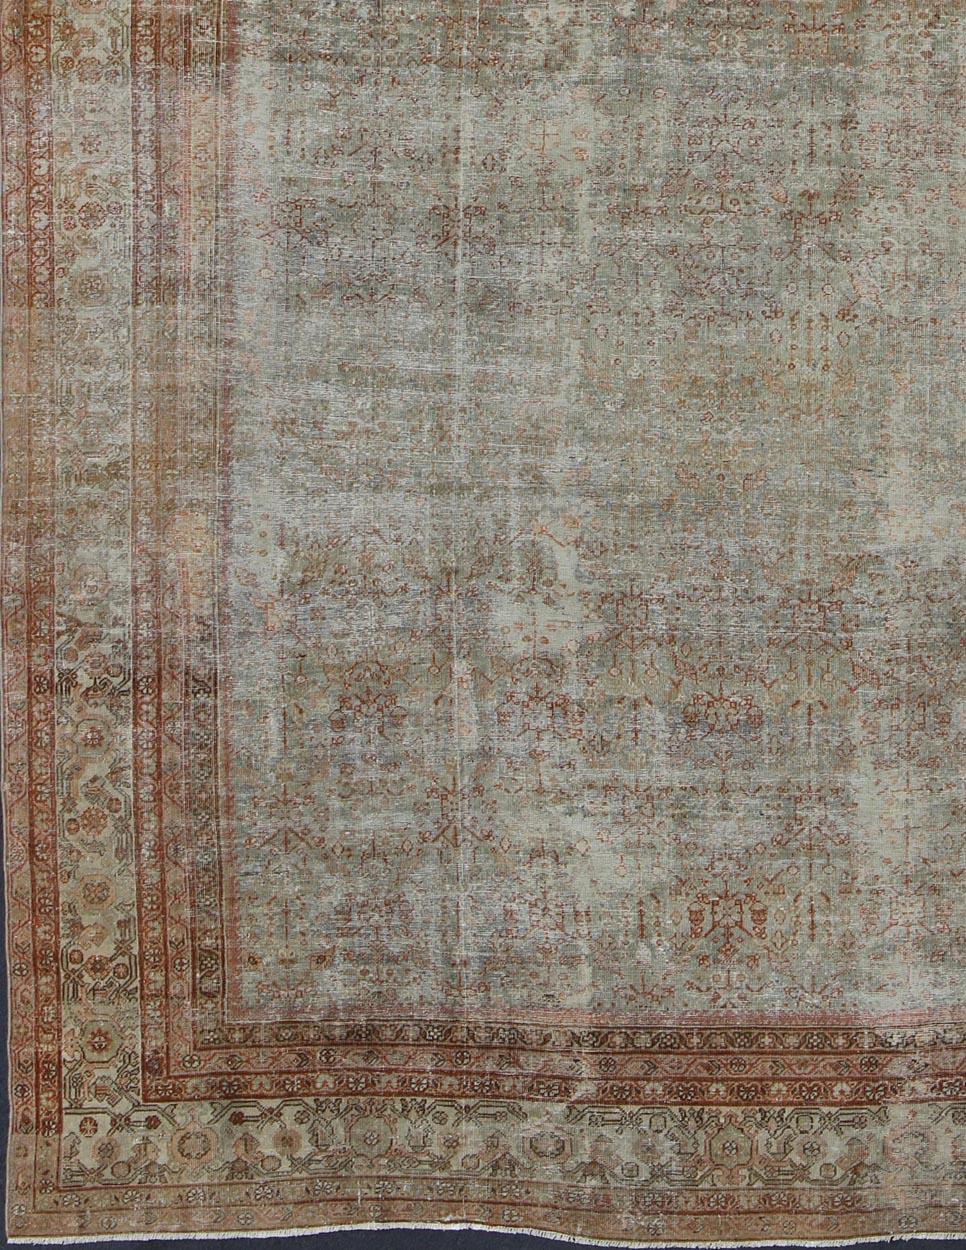 Green and neutrals subdued antique Distressed Persian Sultanabad rug with all-over floral design, rug 16-0917, country of origin / type: Iran / Sultanabad, circa 1900.

This antique Persian Sultanabad Mahal relies heavily on exquisite details. A